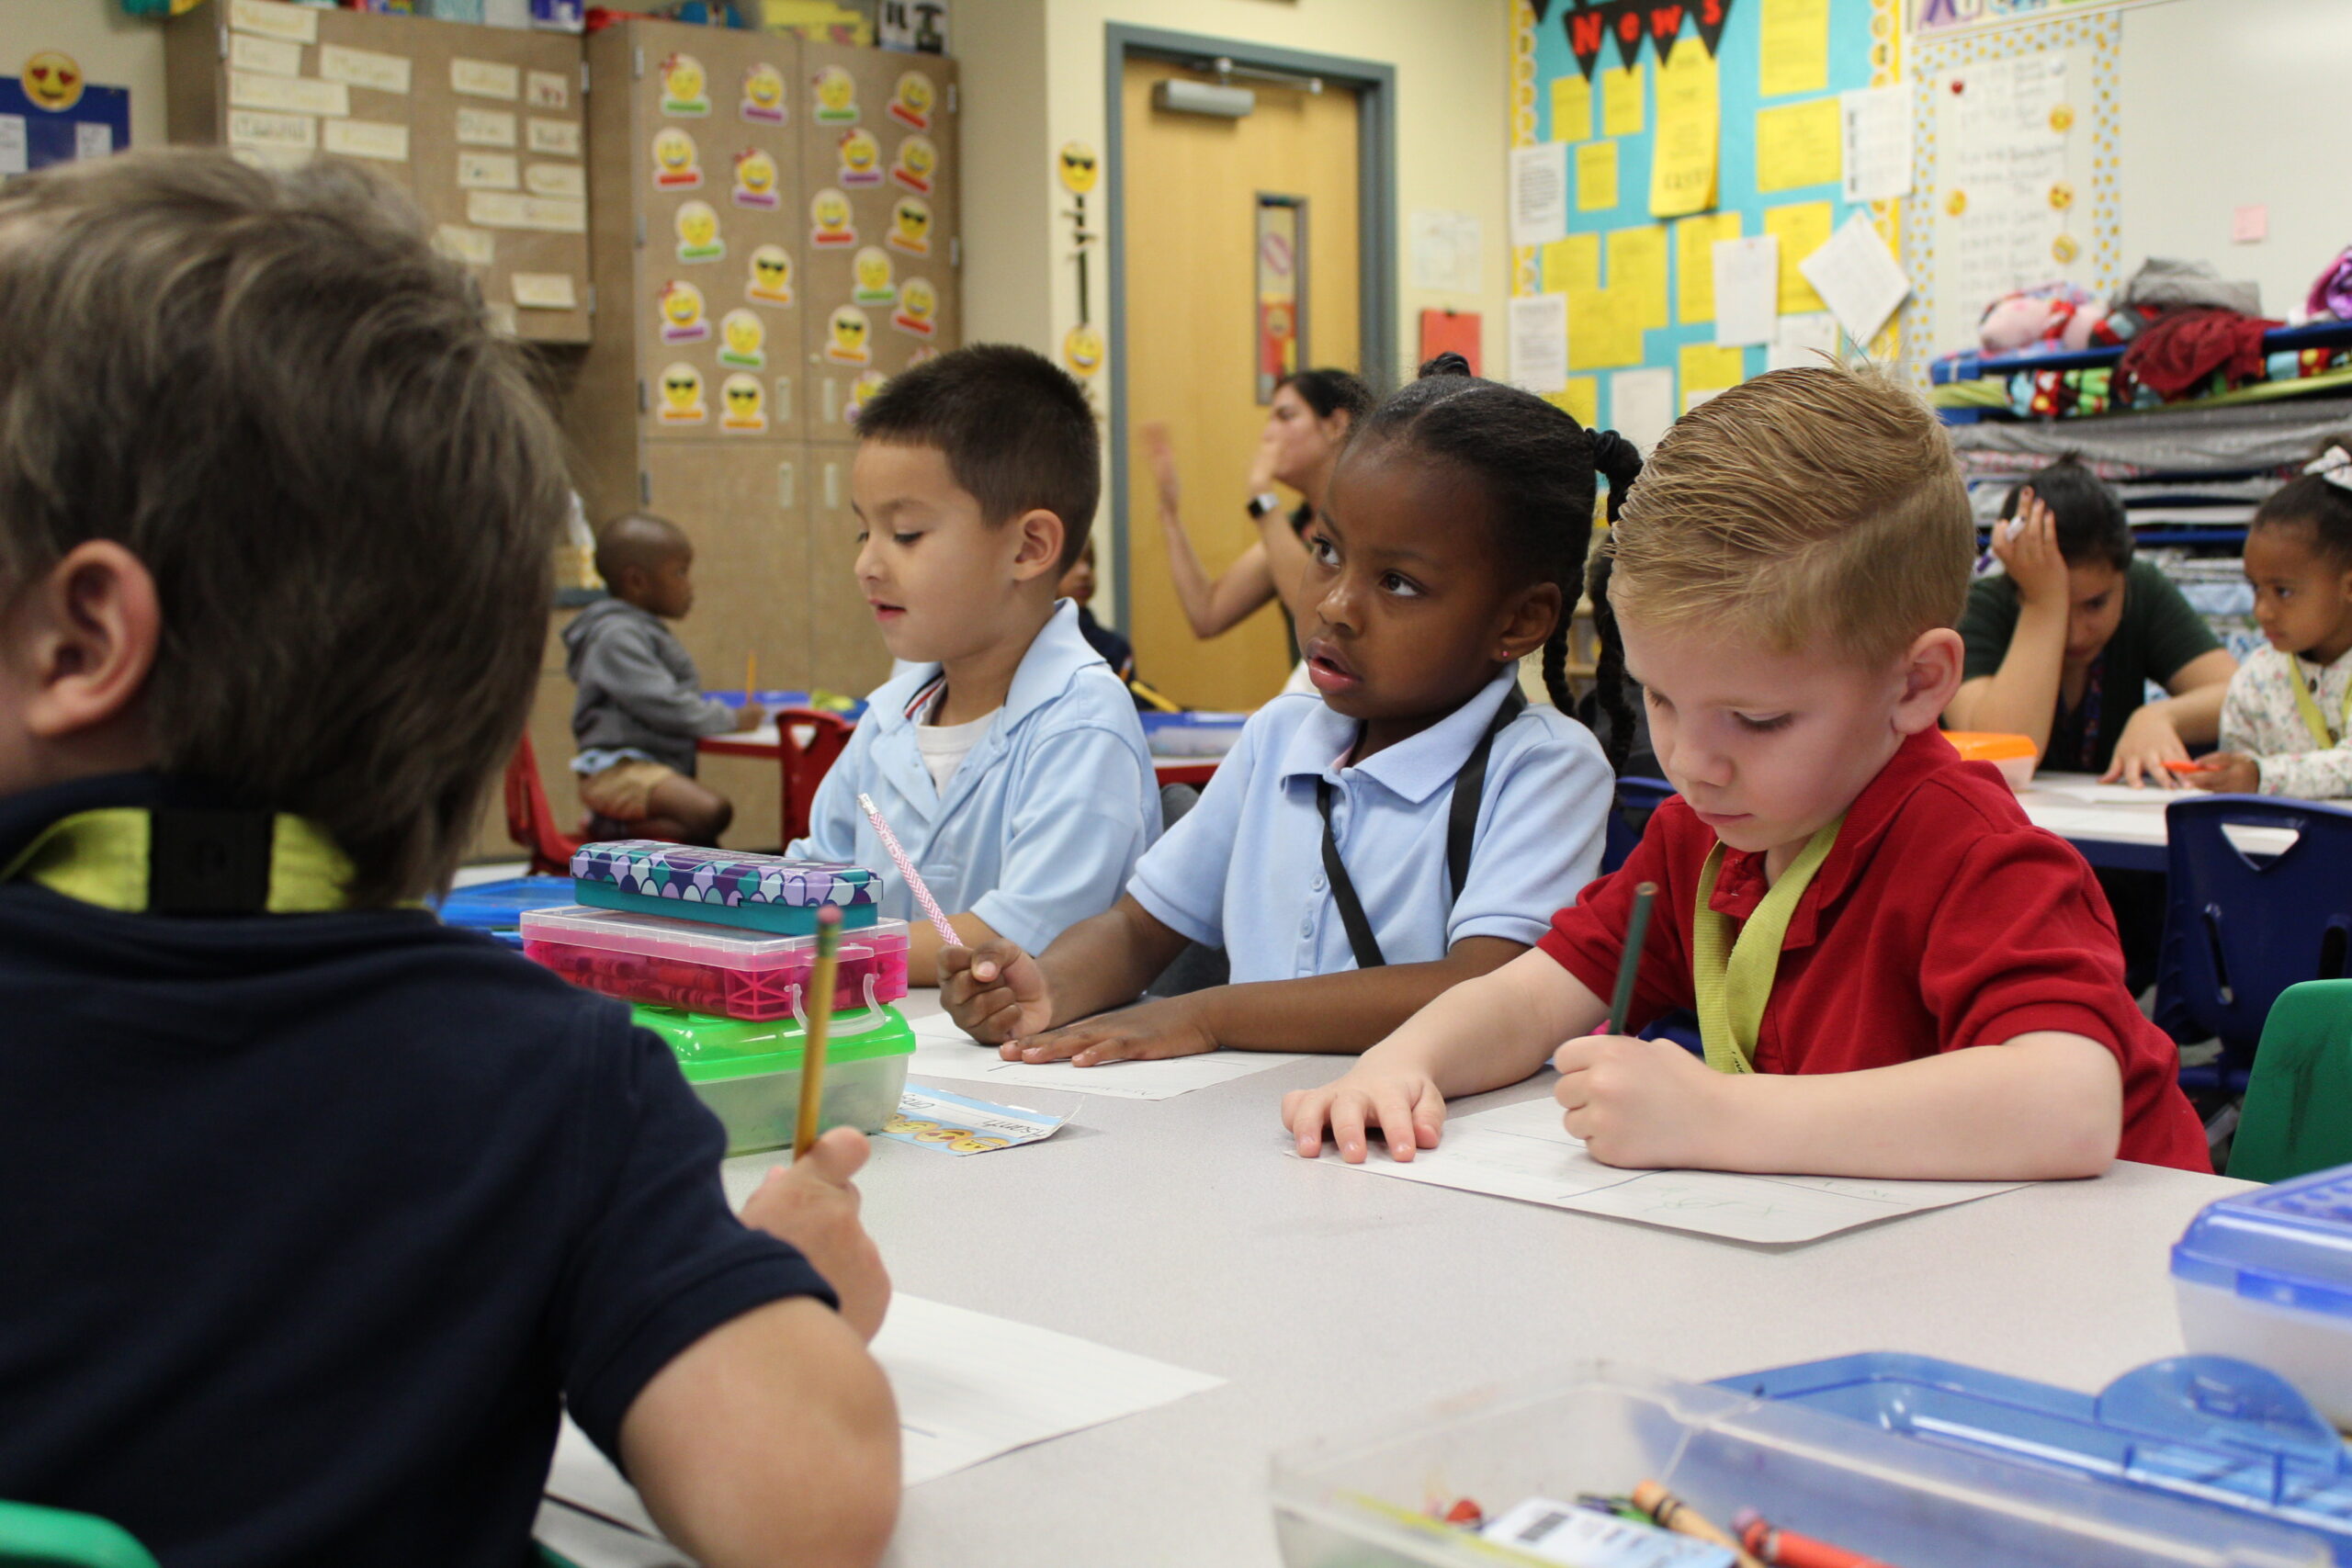 The Laveen Elementary School District is expanding its preschool program with a third location, which will open in Fall 2019 at Vista del Sur. (Photo Courtesy of Laveen Elementary School District)